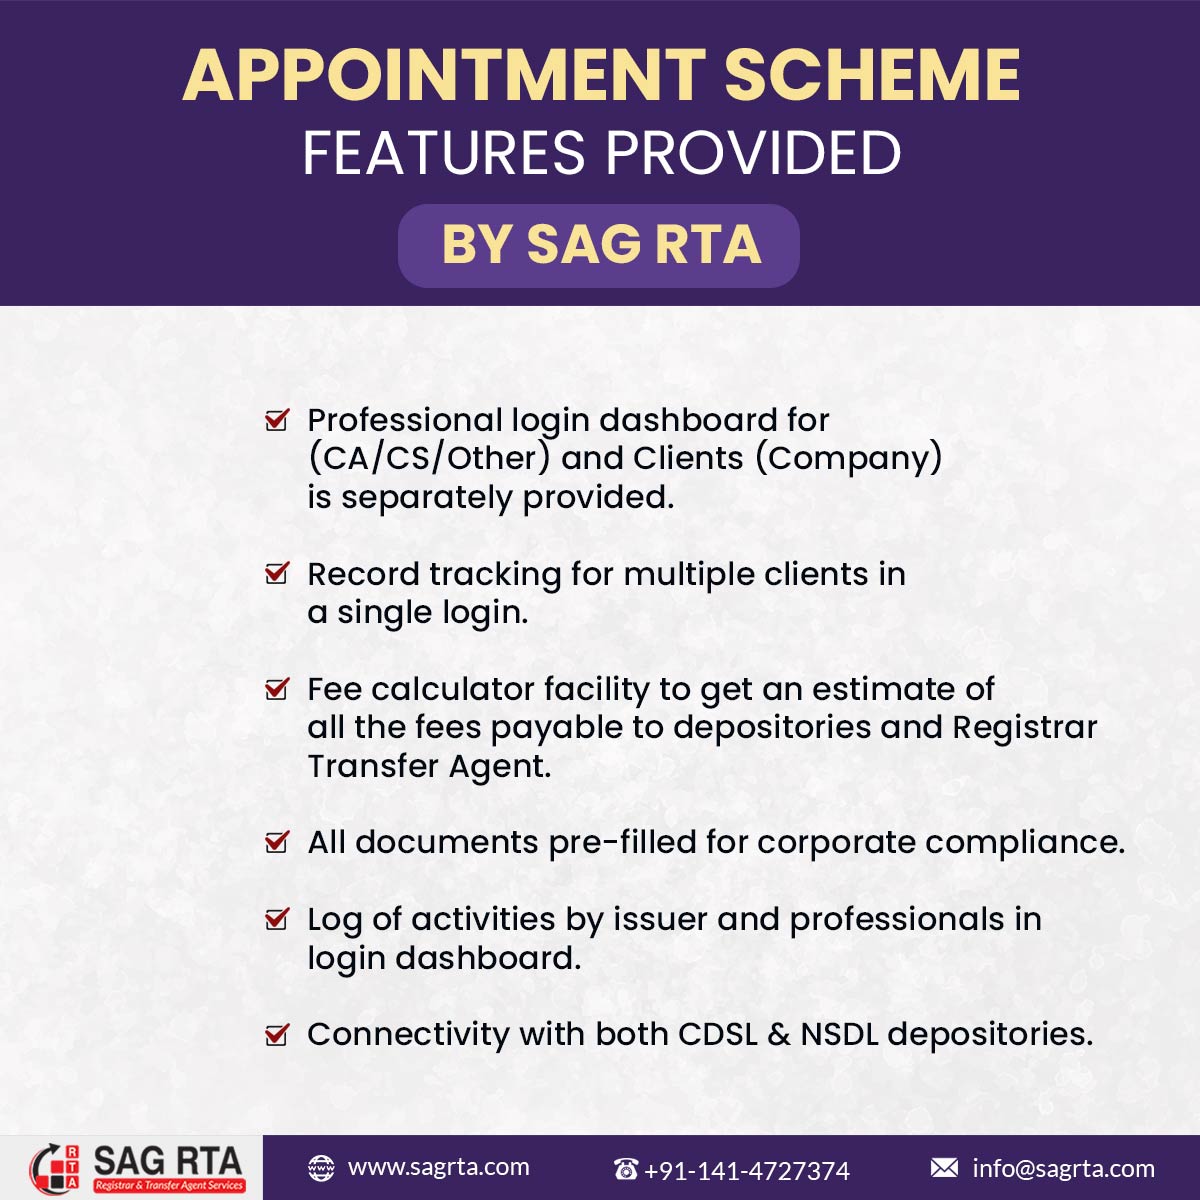 Take a look at what SAG RTA offers in terms of appointment schemes.
Read More:bit.ly/3U0xs9j
#Clients #CDSL #NSDL #dematerialization #shares #securities #SEBI #companies #registrarandtransferagent #Registrarandsharetransferagent #rtaservices #rtaagent #rtaforms #rtaIndia